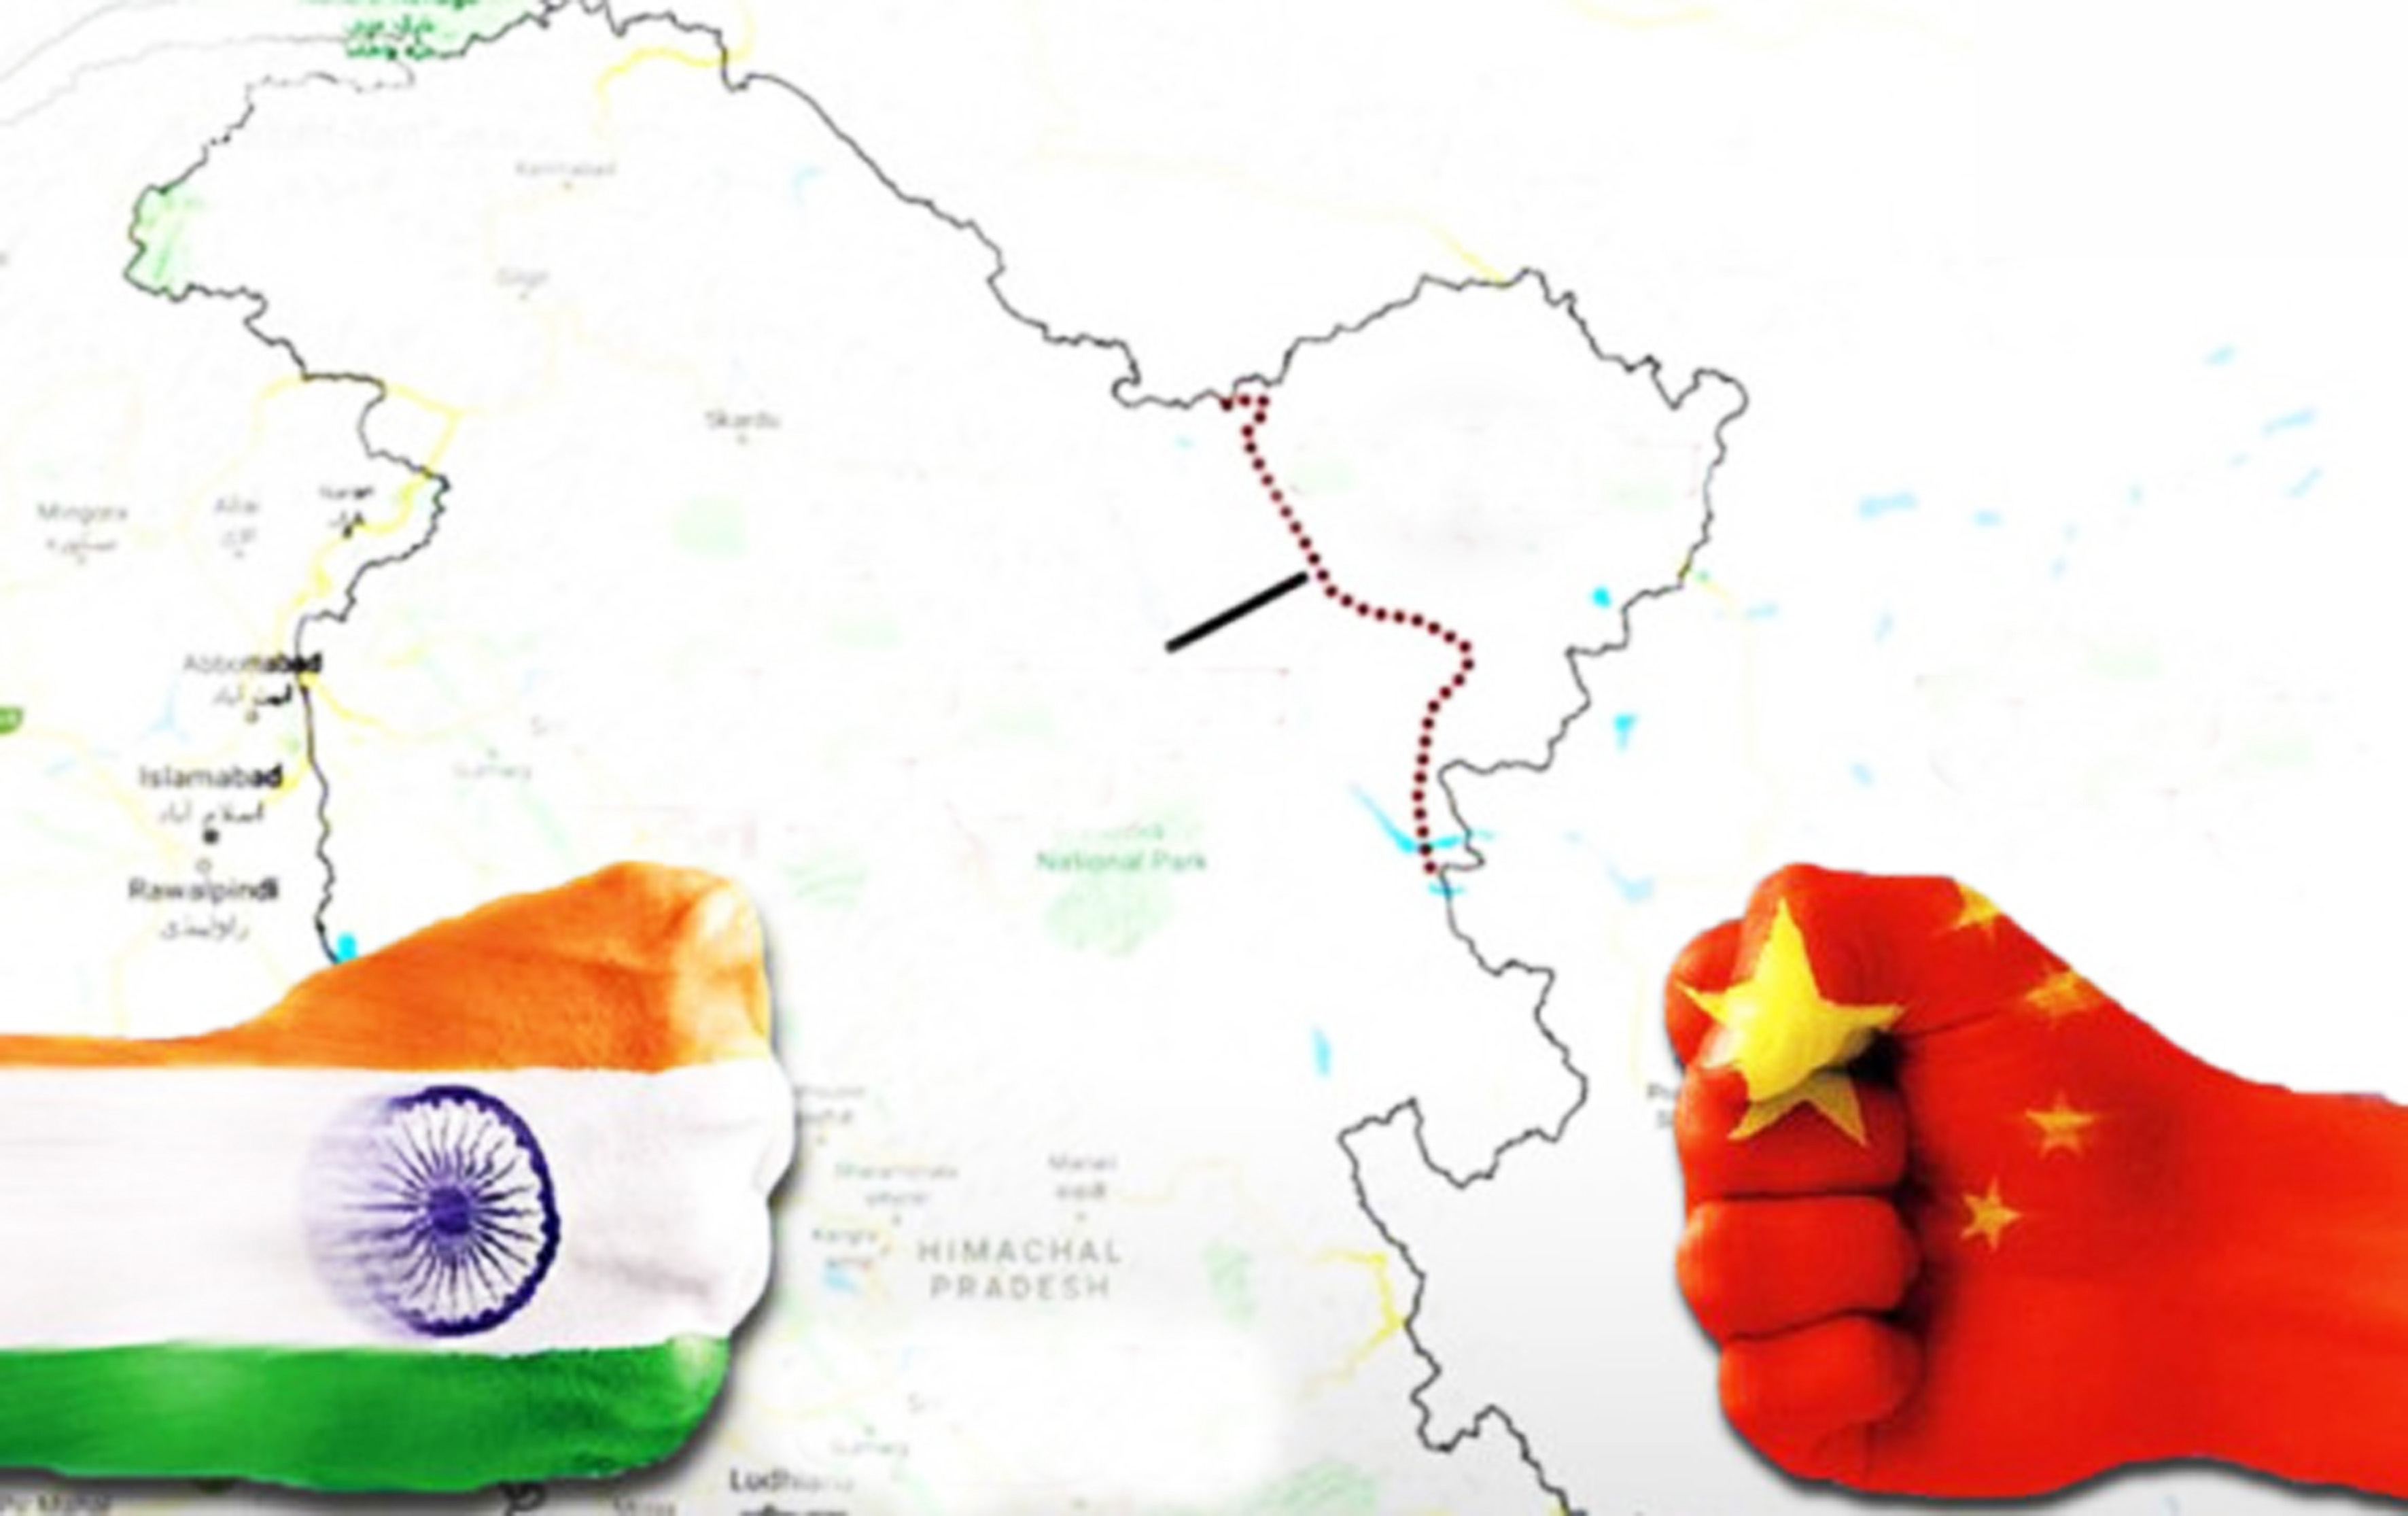 Modi got into the field with a rage over the new map released by China